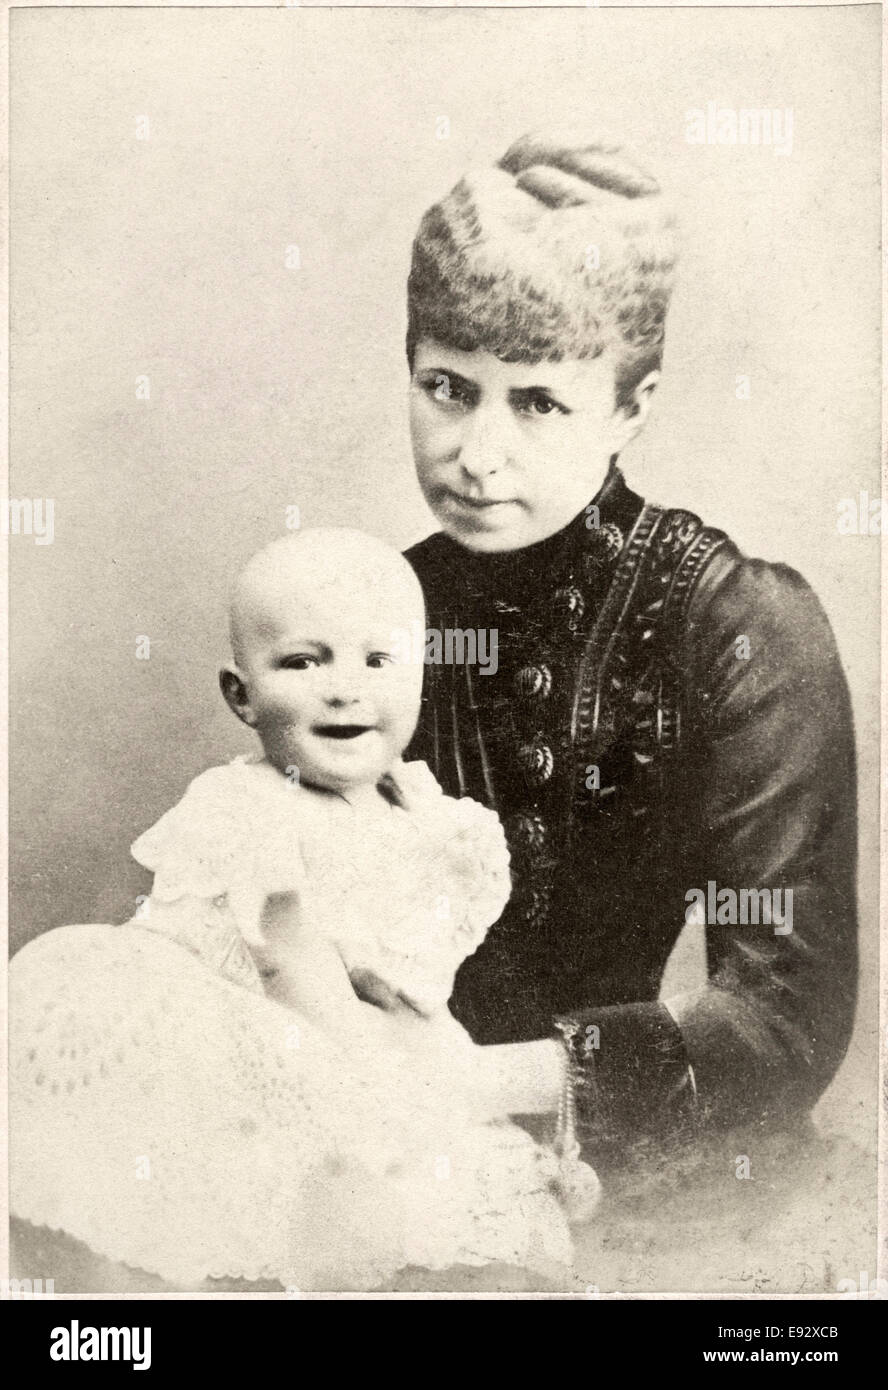 Alfonso XIII (1886-1941), King of Spain, and Mother, Maria Christina of Austria, Queen Regent (1858-1929), Portrait, Albumen Cabinet Card, circa 1886 Stock Photo